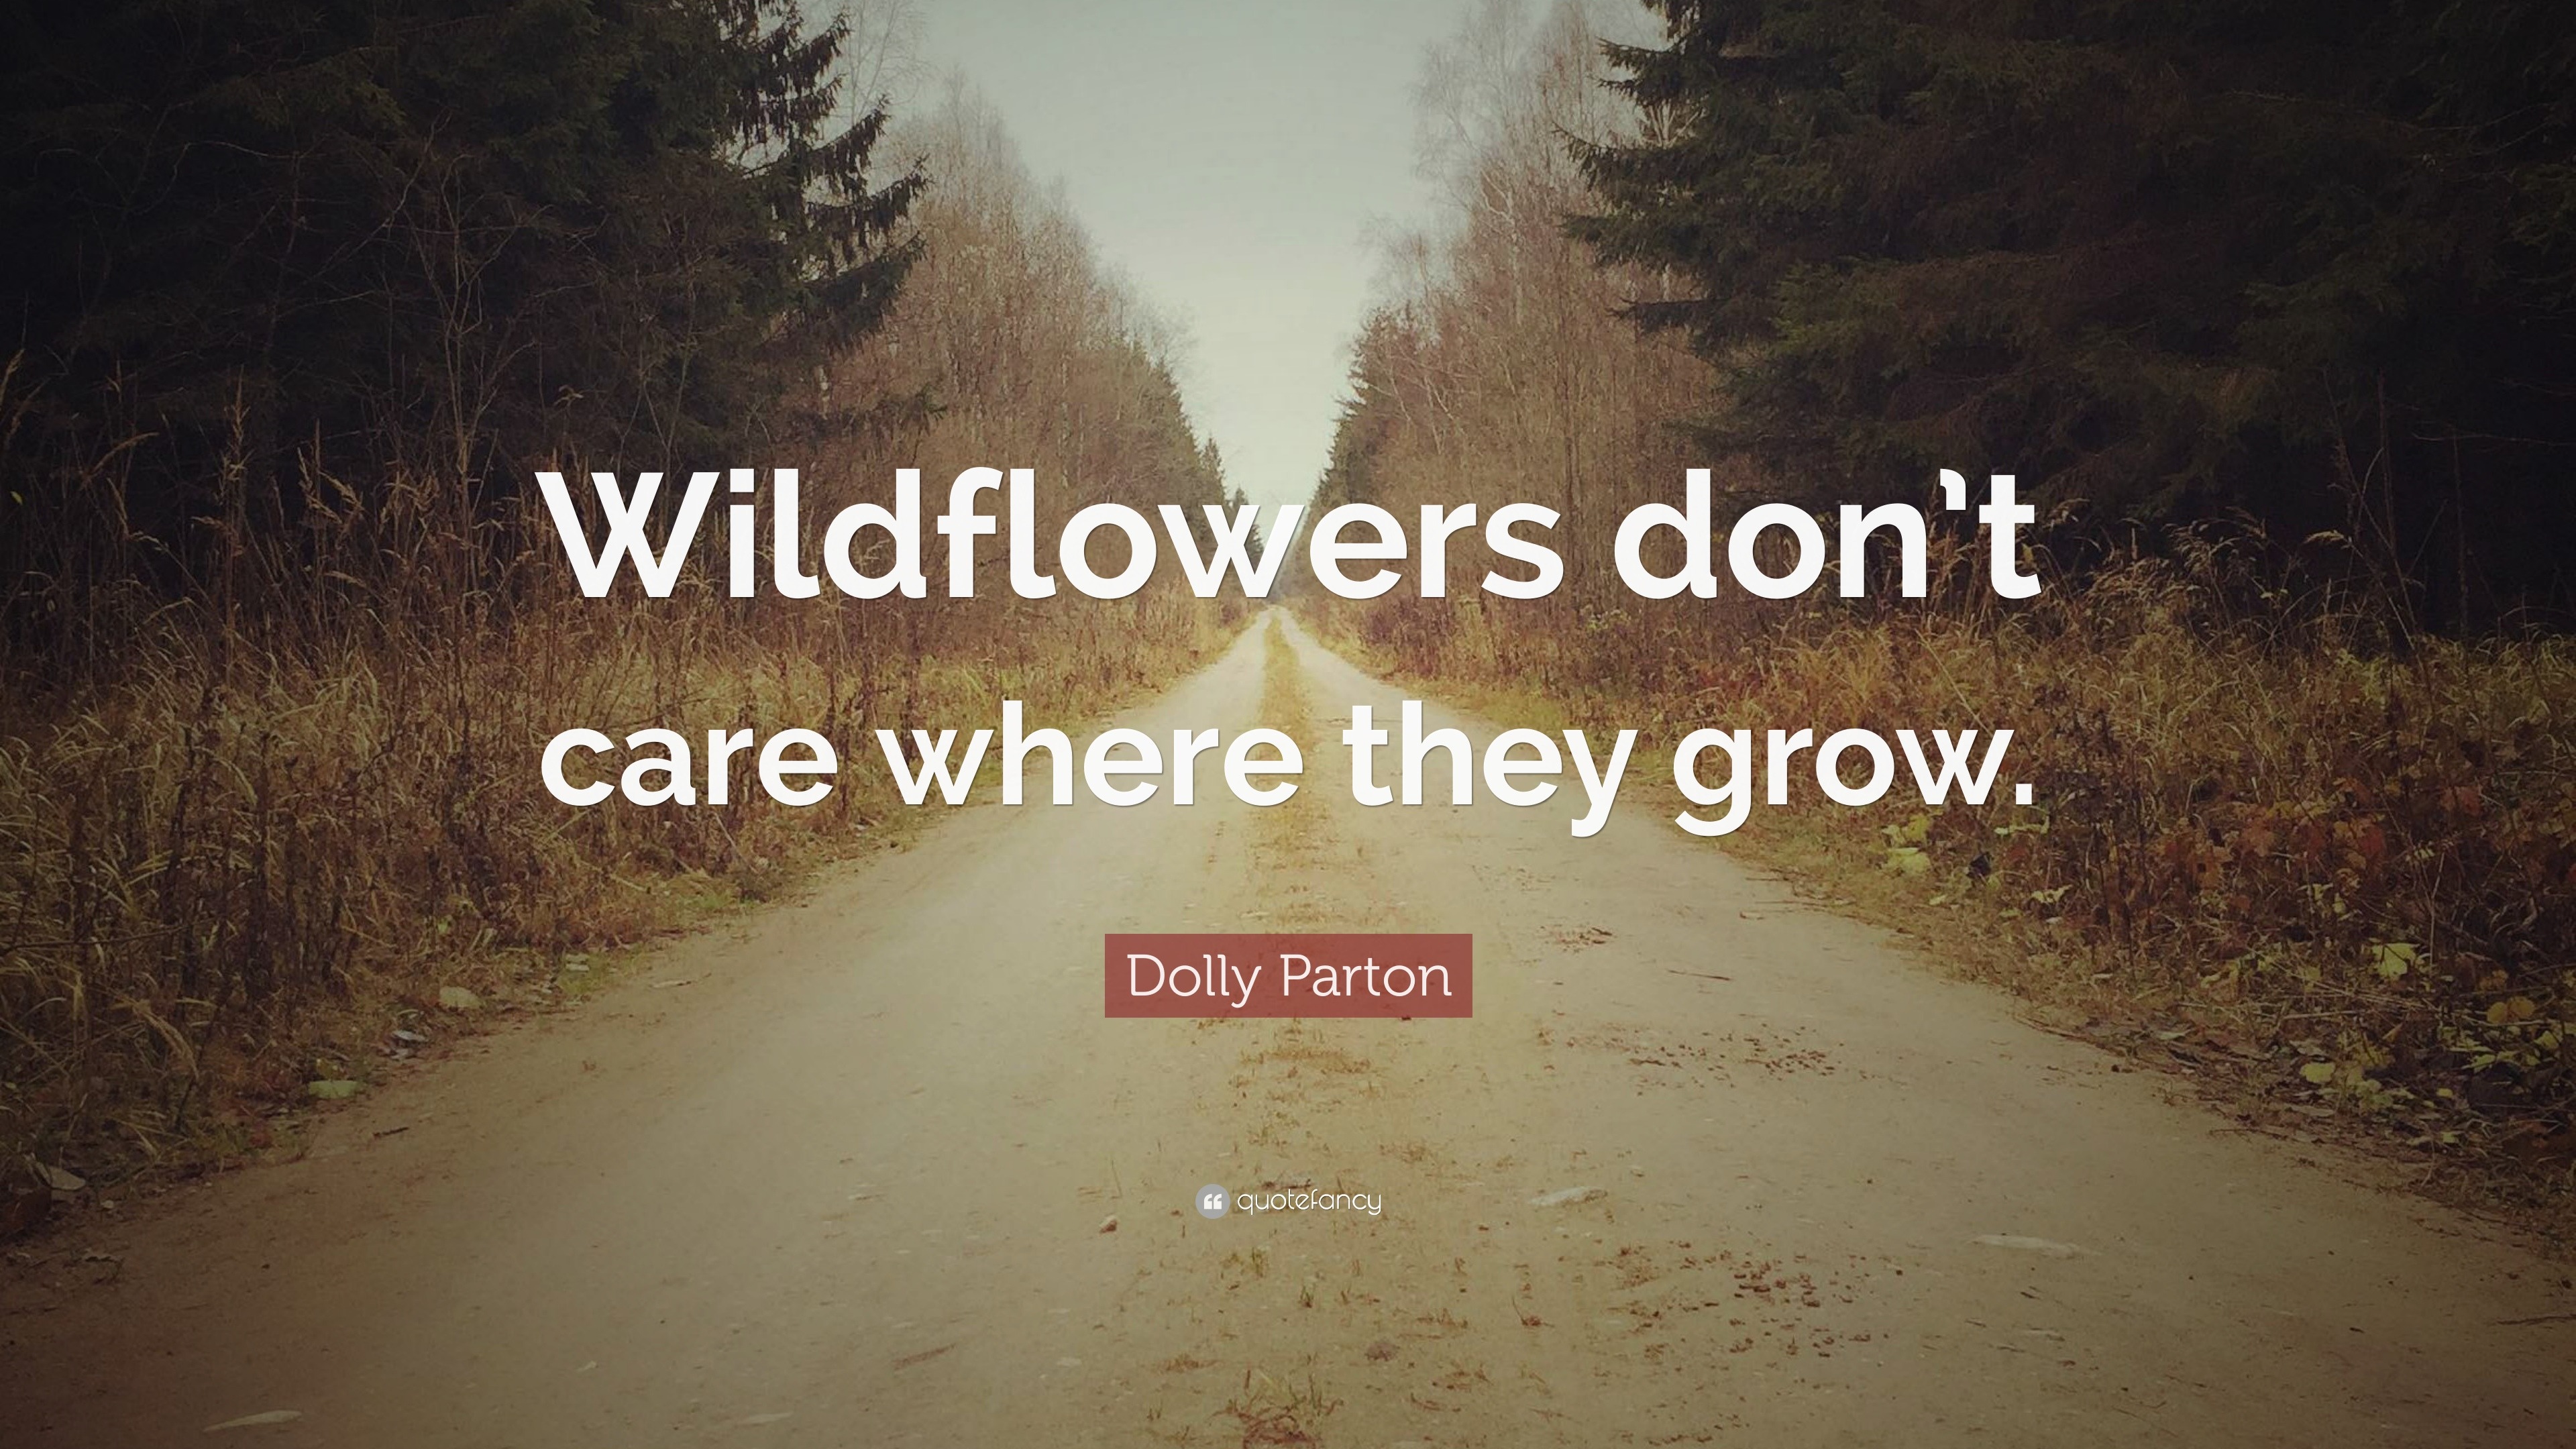 Top 450 Dolly Parton Quotes 2023 Update  Quotefancy